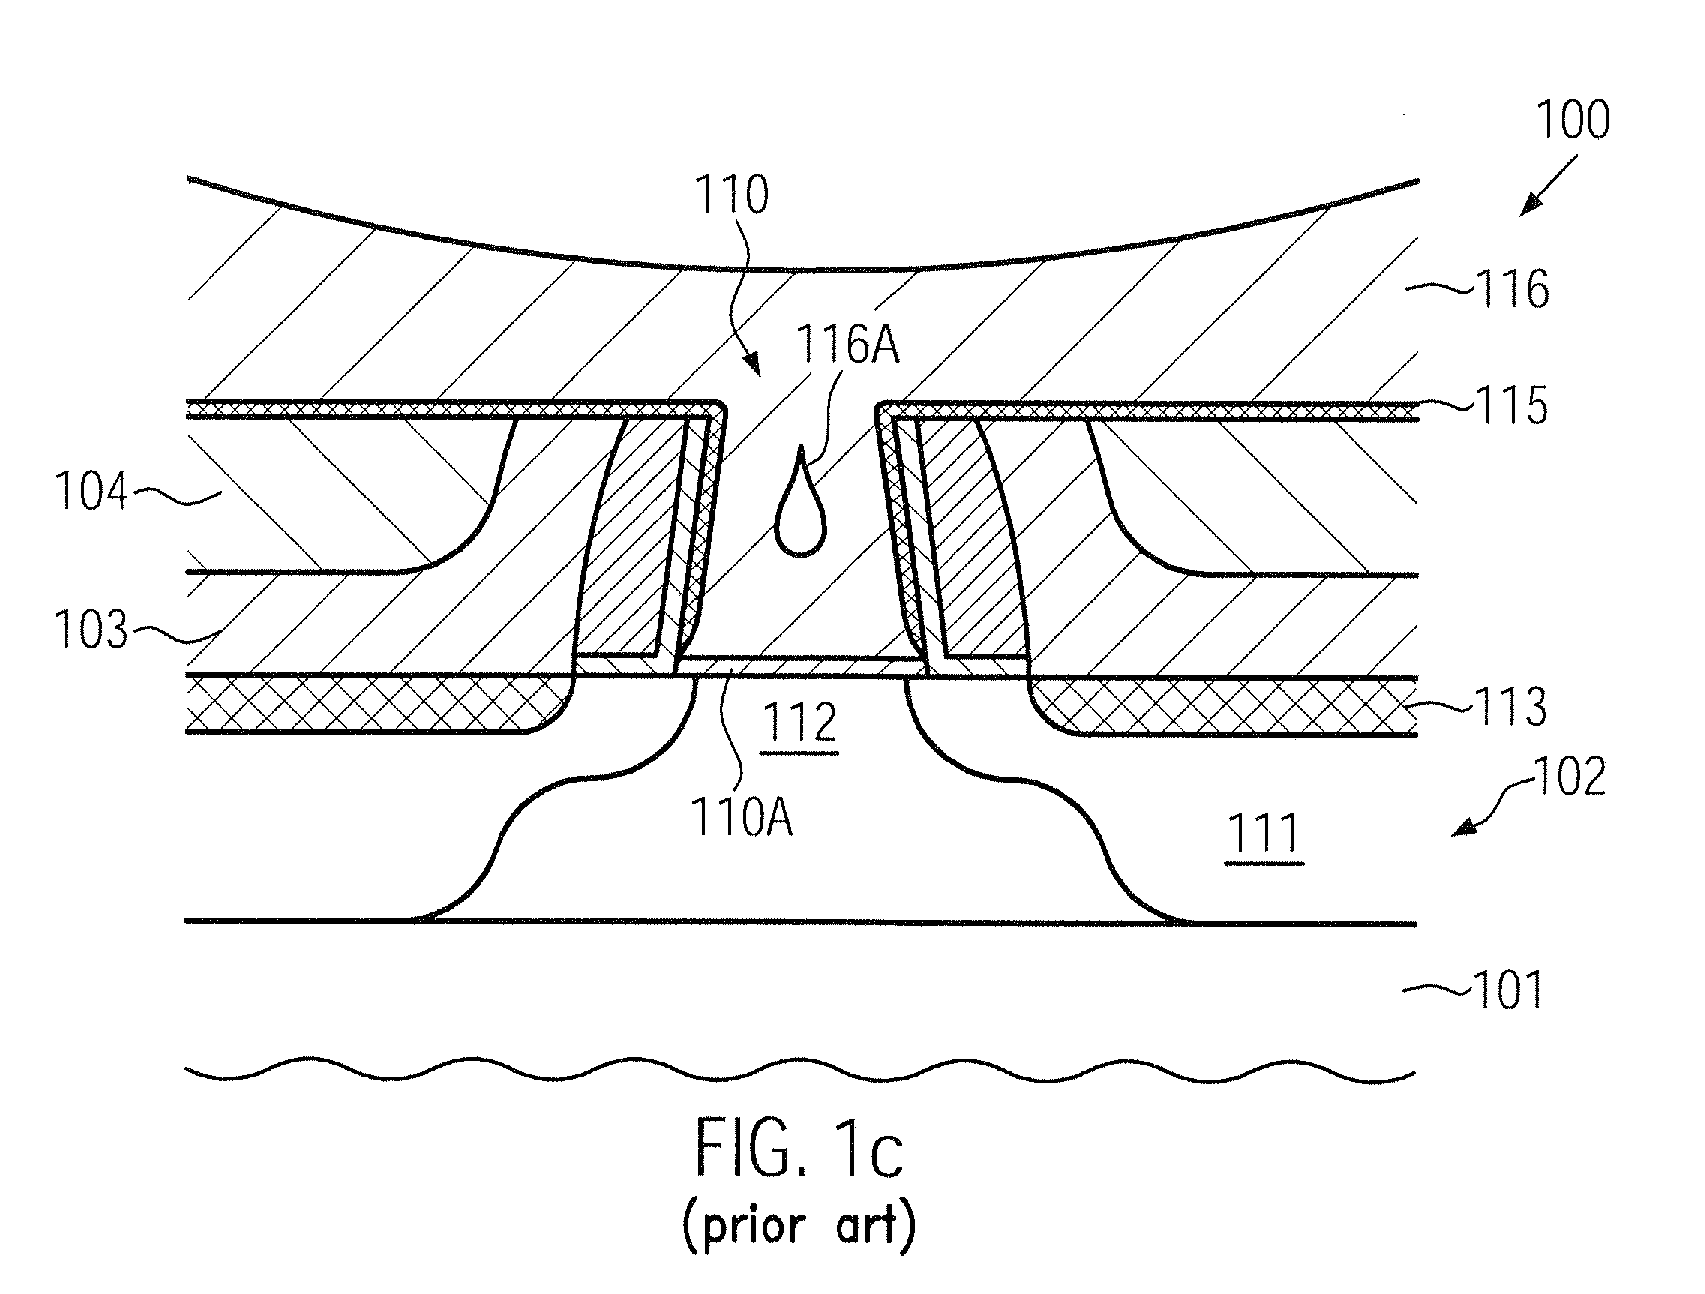 High-k gate electrode structure formed after transistor fabrication by using a spacer